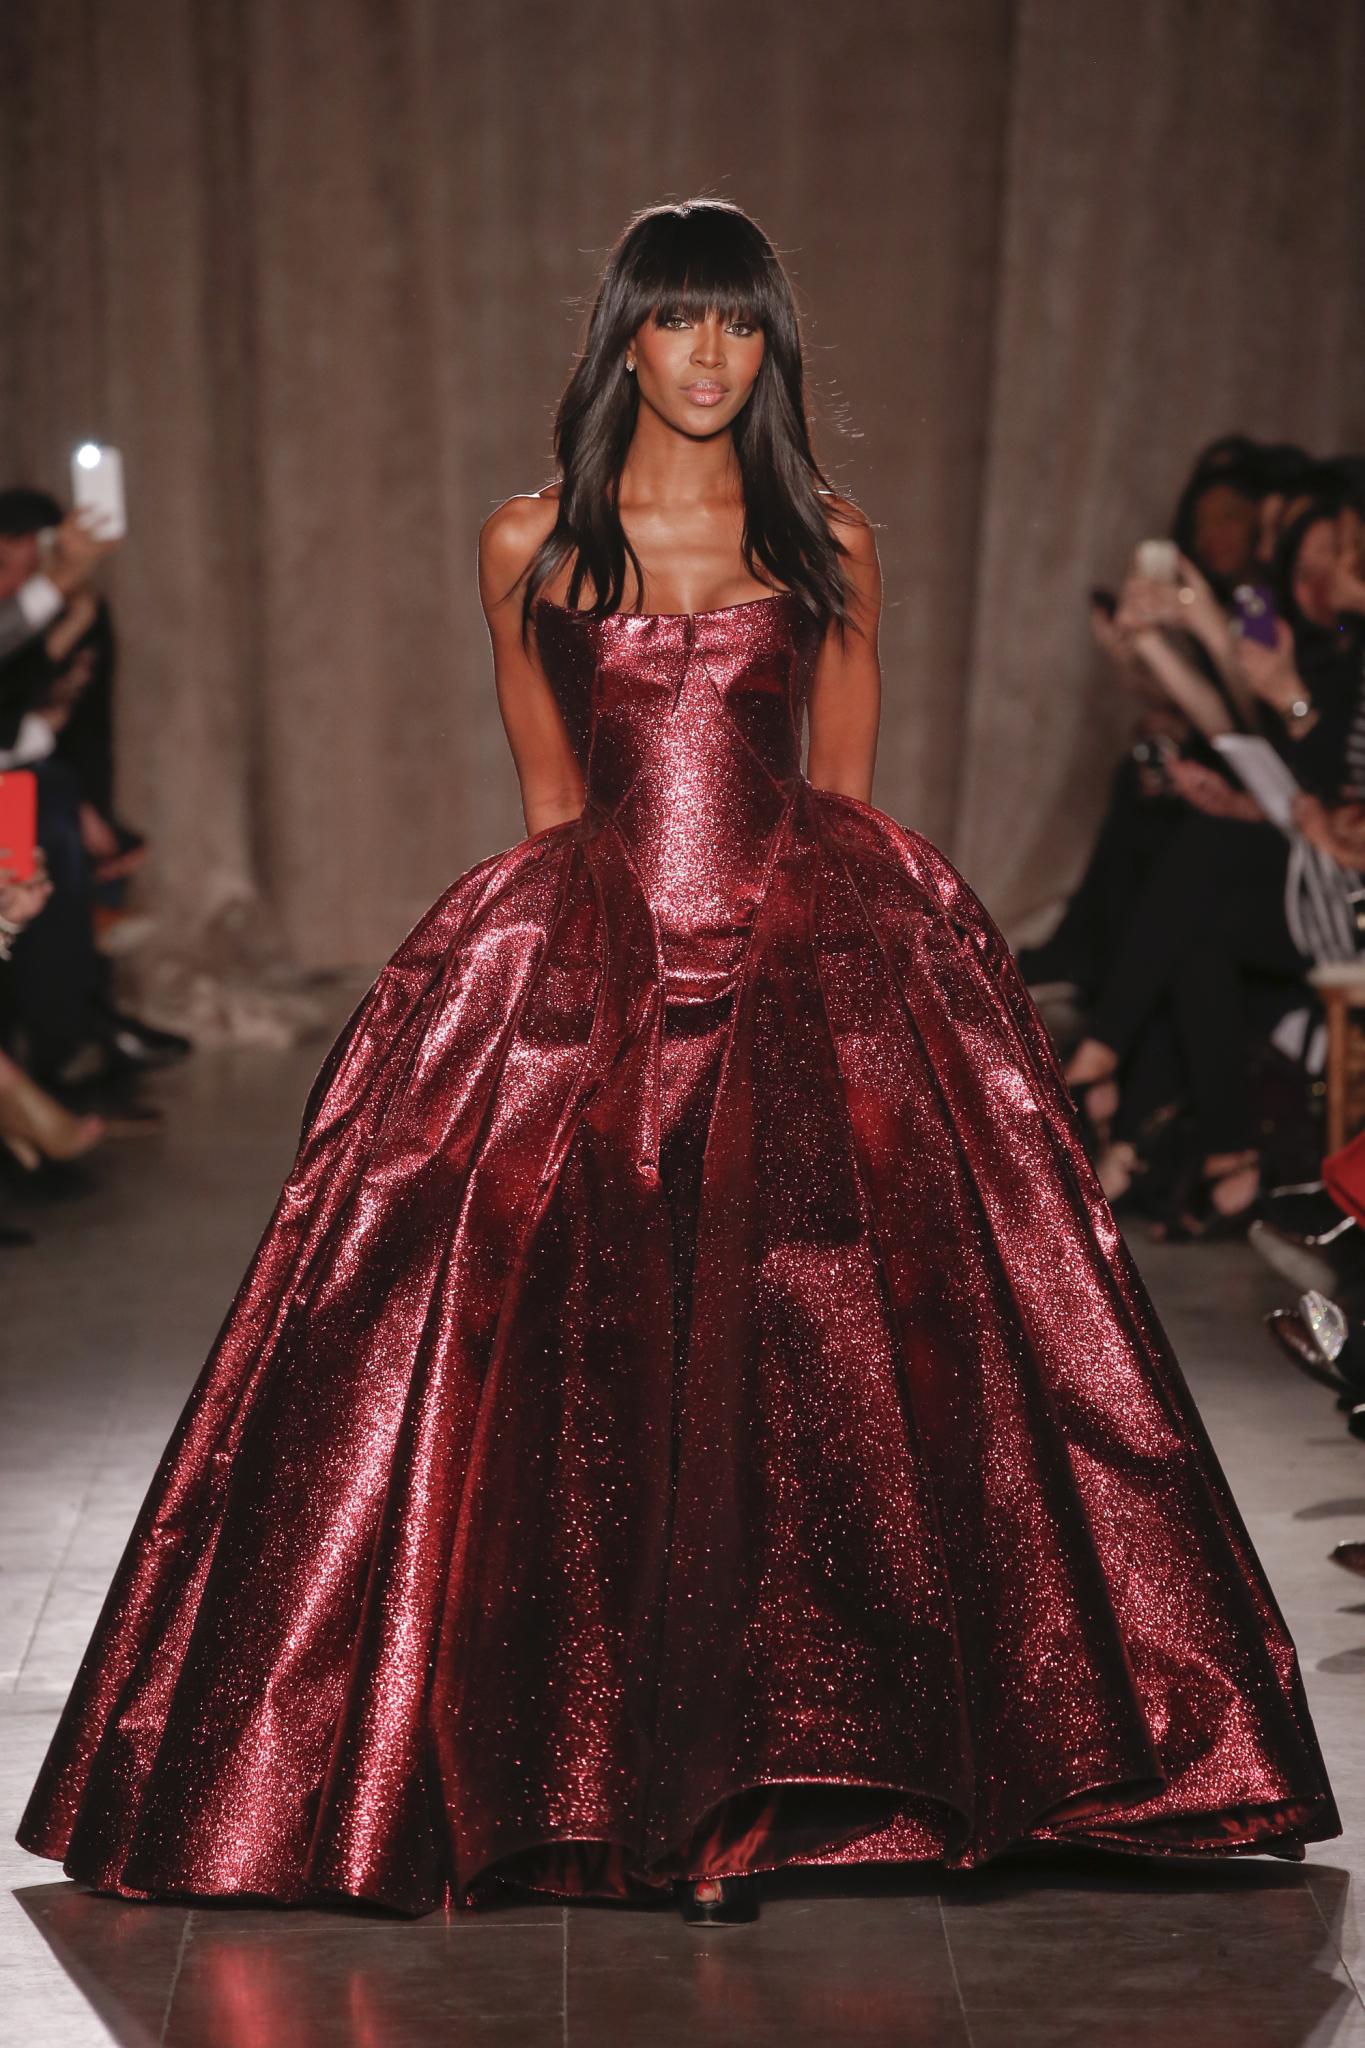 Get Naomi Campbell’s Hair From Zac Posen’s Fall Show